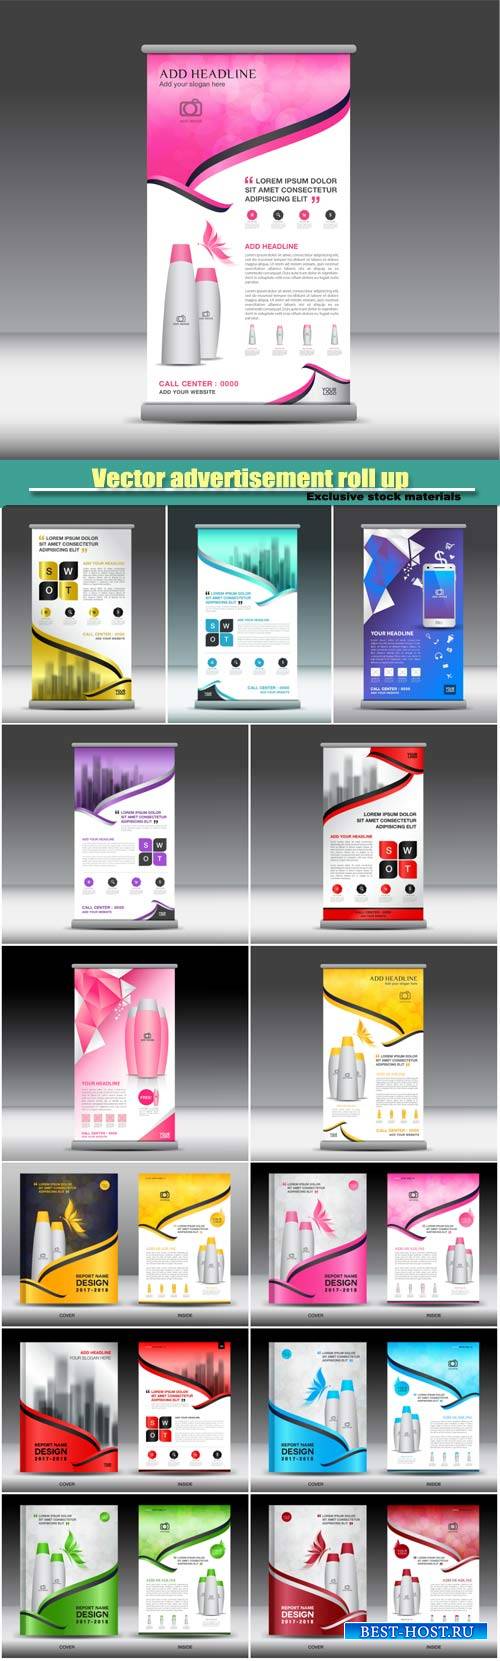 Roll up banner template vector illustration